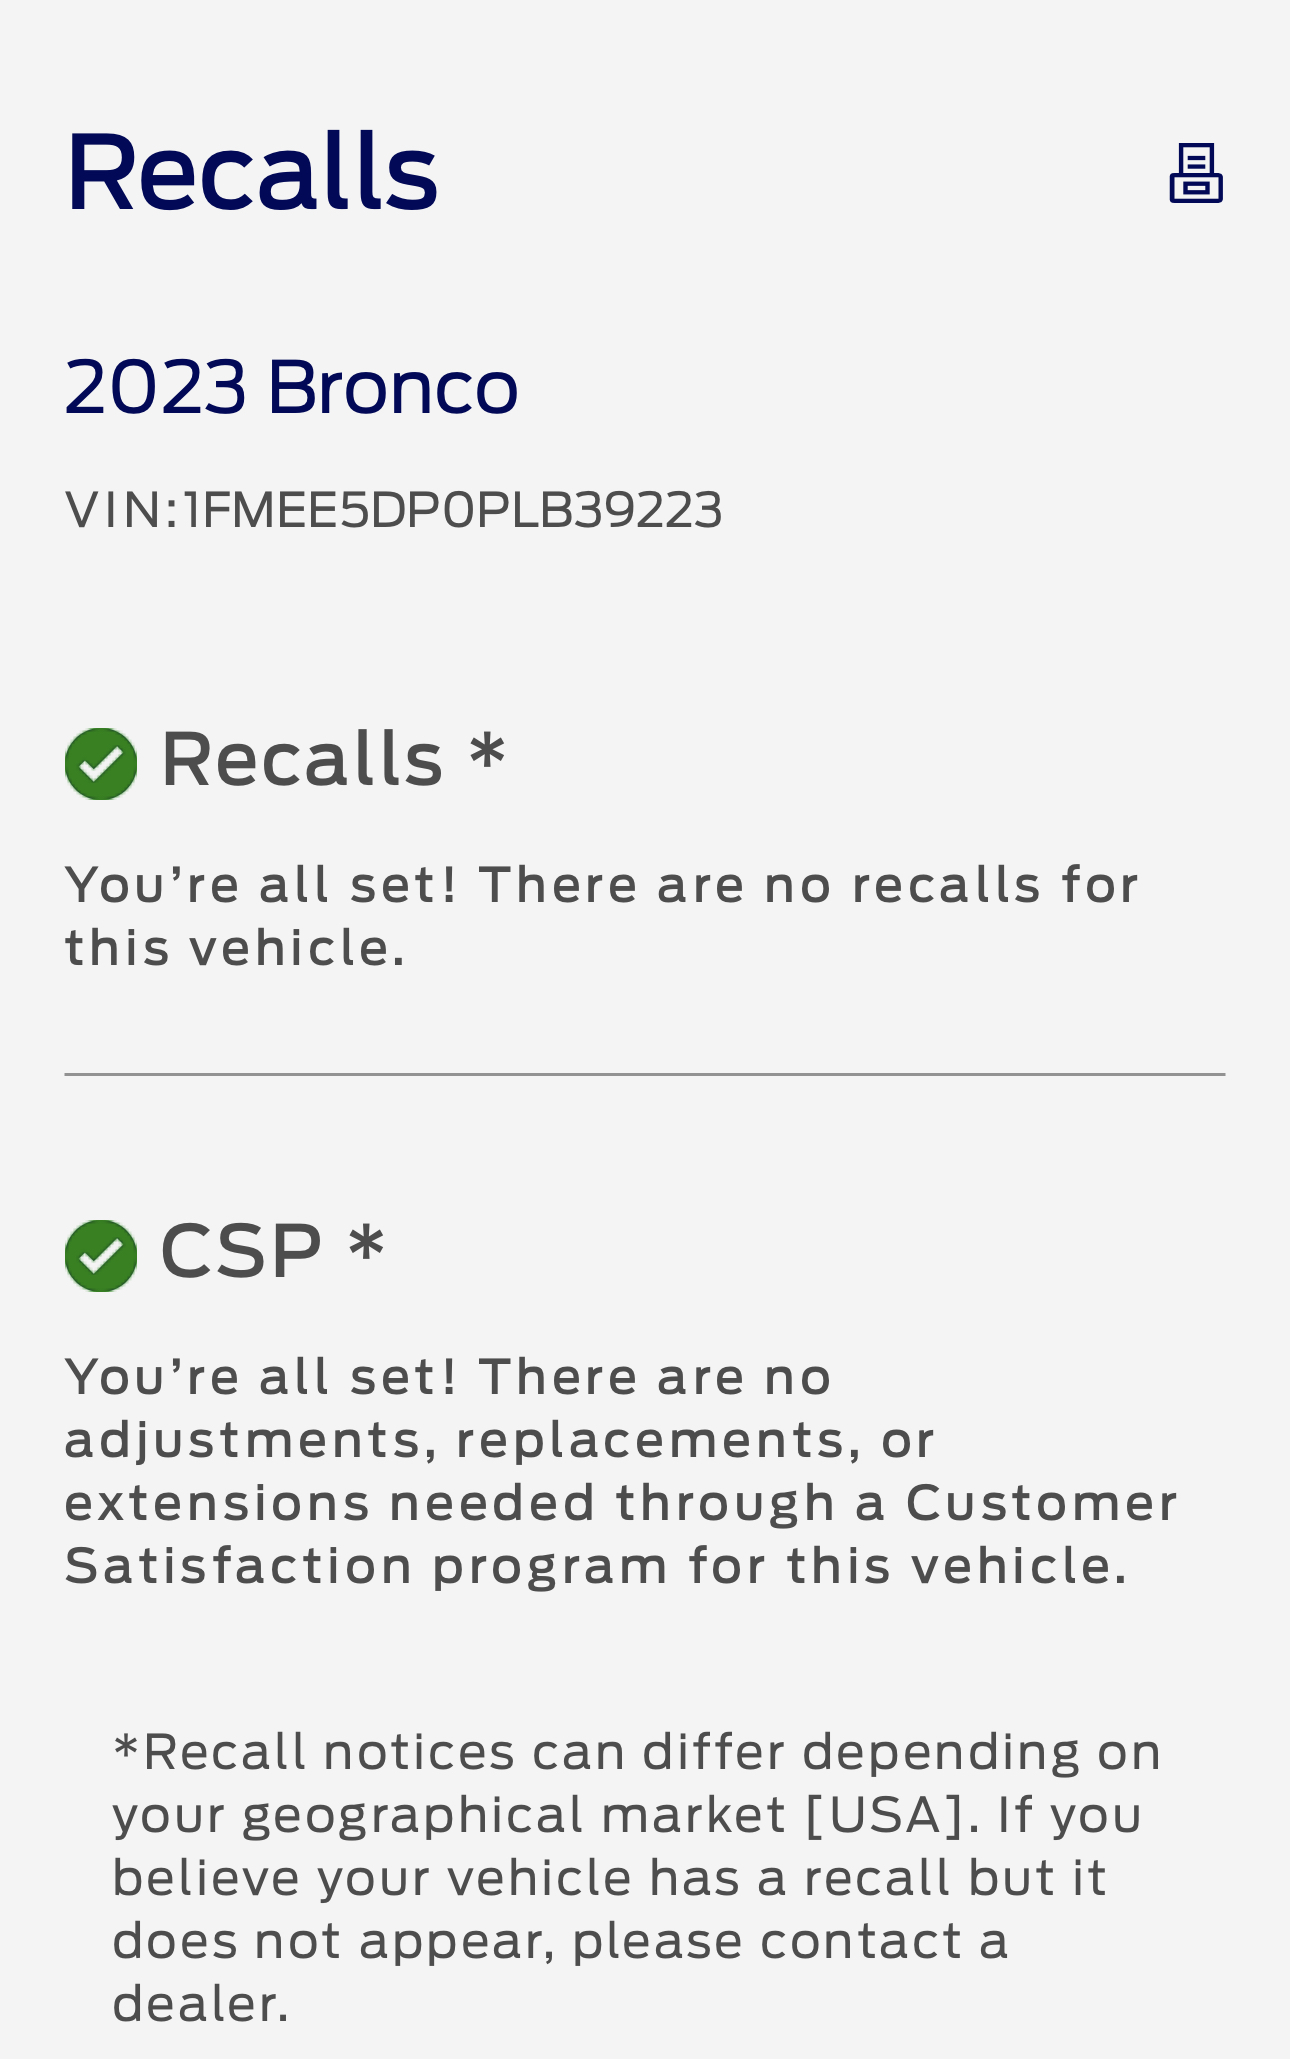 Ford Bronco Recall 23C16 & Delivery Hold : Seat Belt Latch Plate Access For 2021-2023 Bronco w/ Production Build Dates 9/23/20 - 5/9/23 IMG_2976